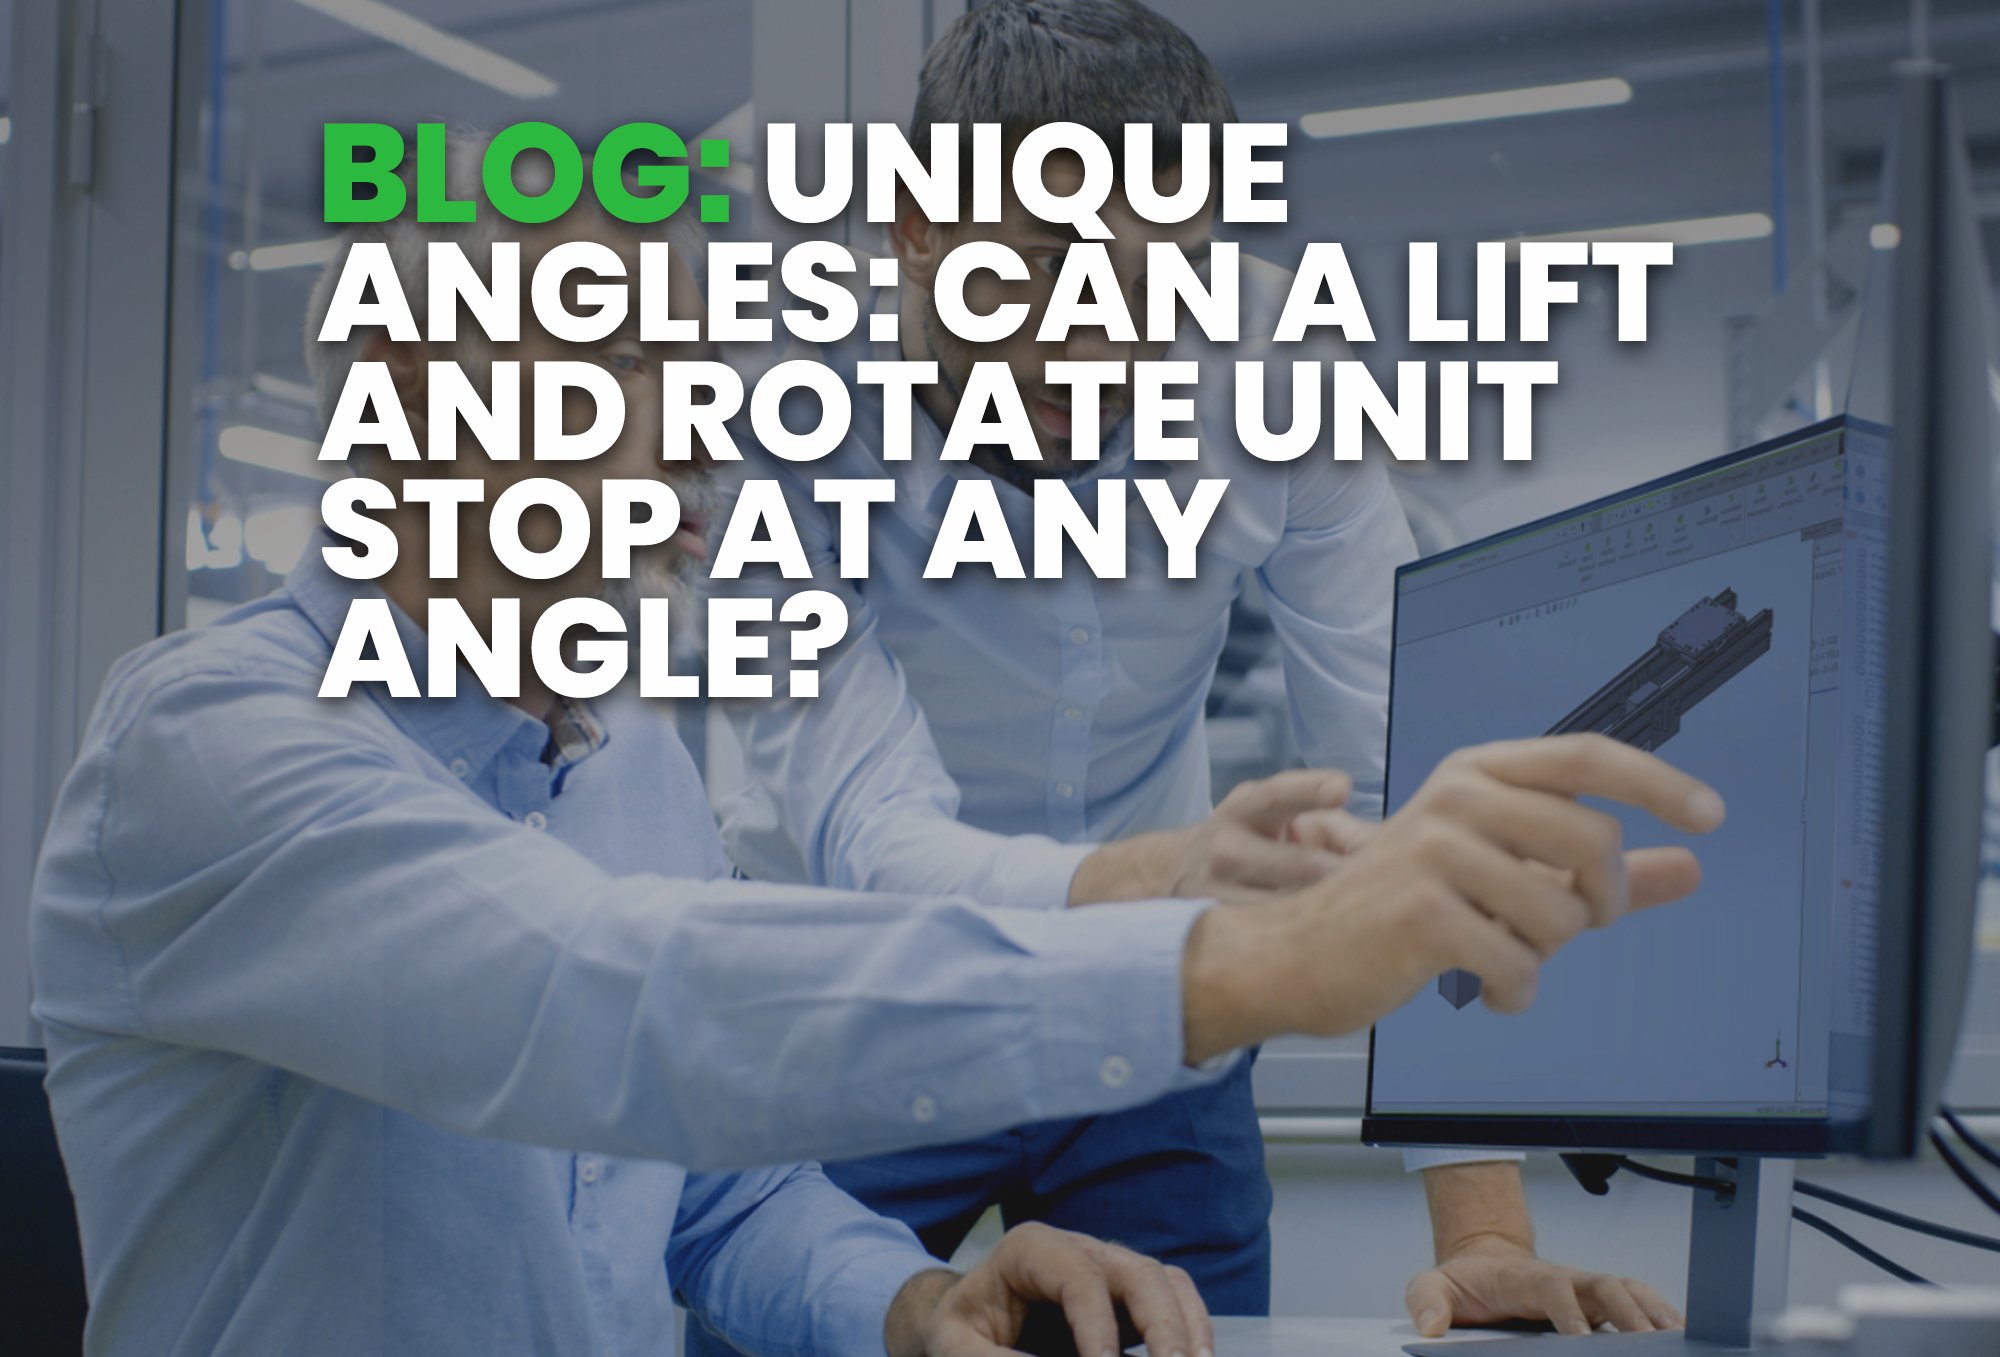 BLOG- Unique Angles- Can A Lift and Rotate Unit Stop at Any Angle?